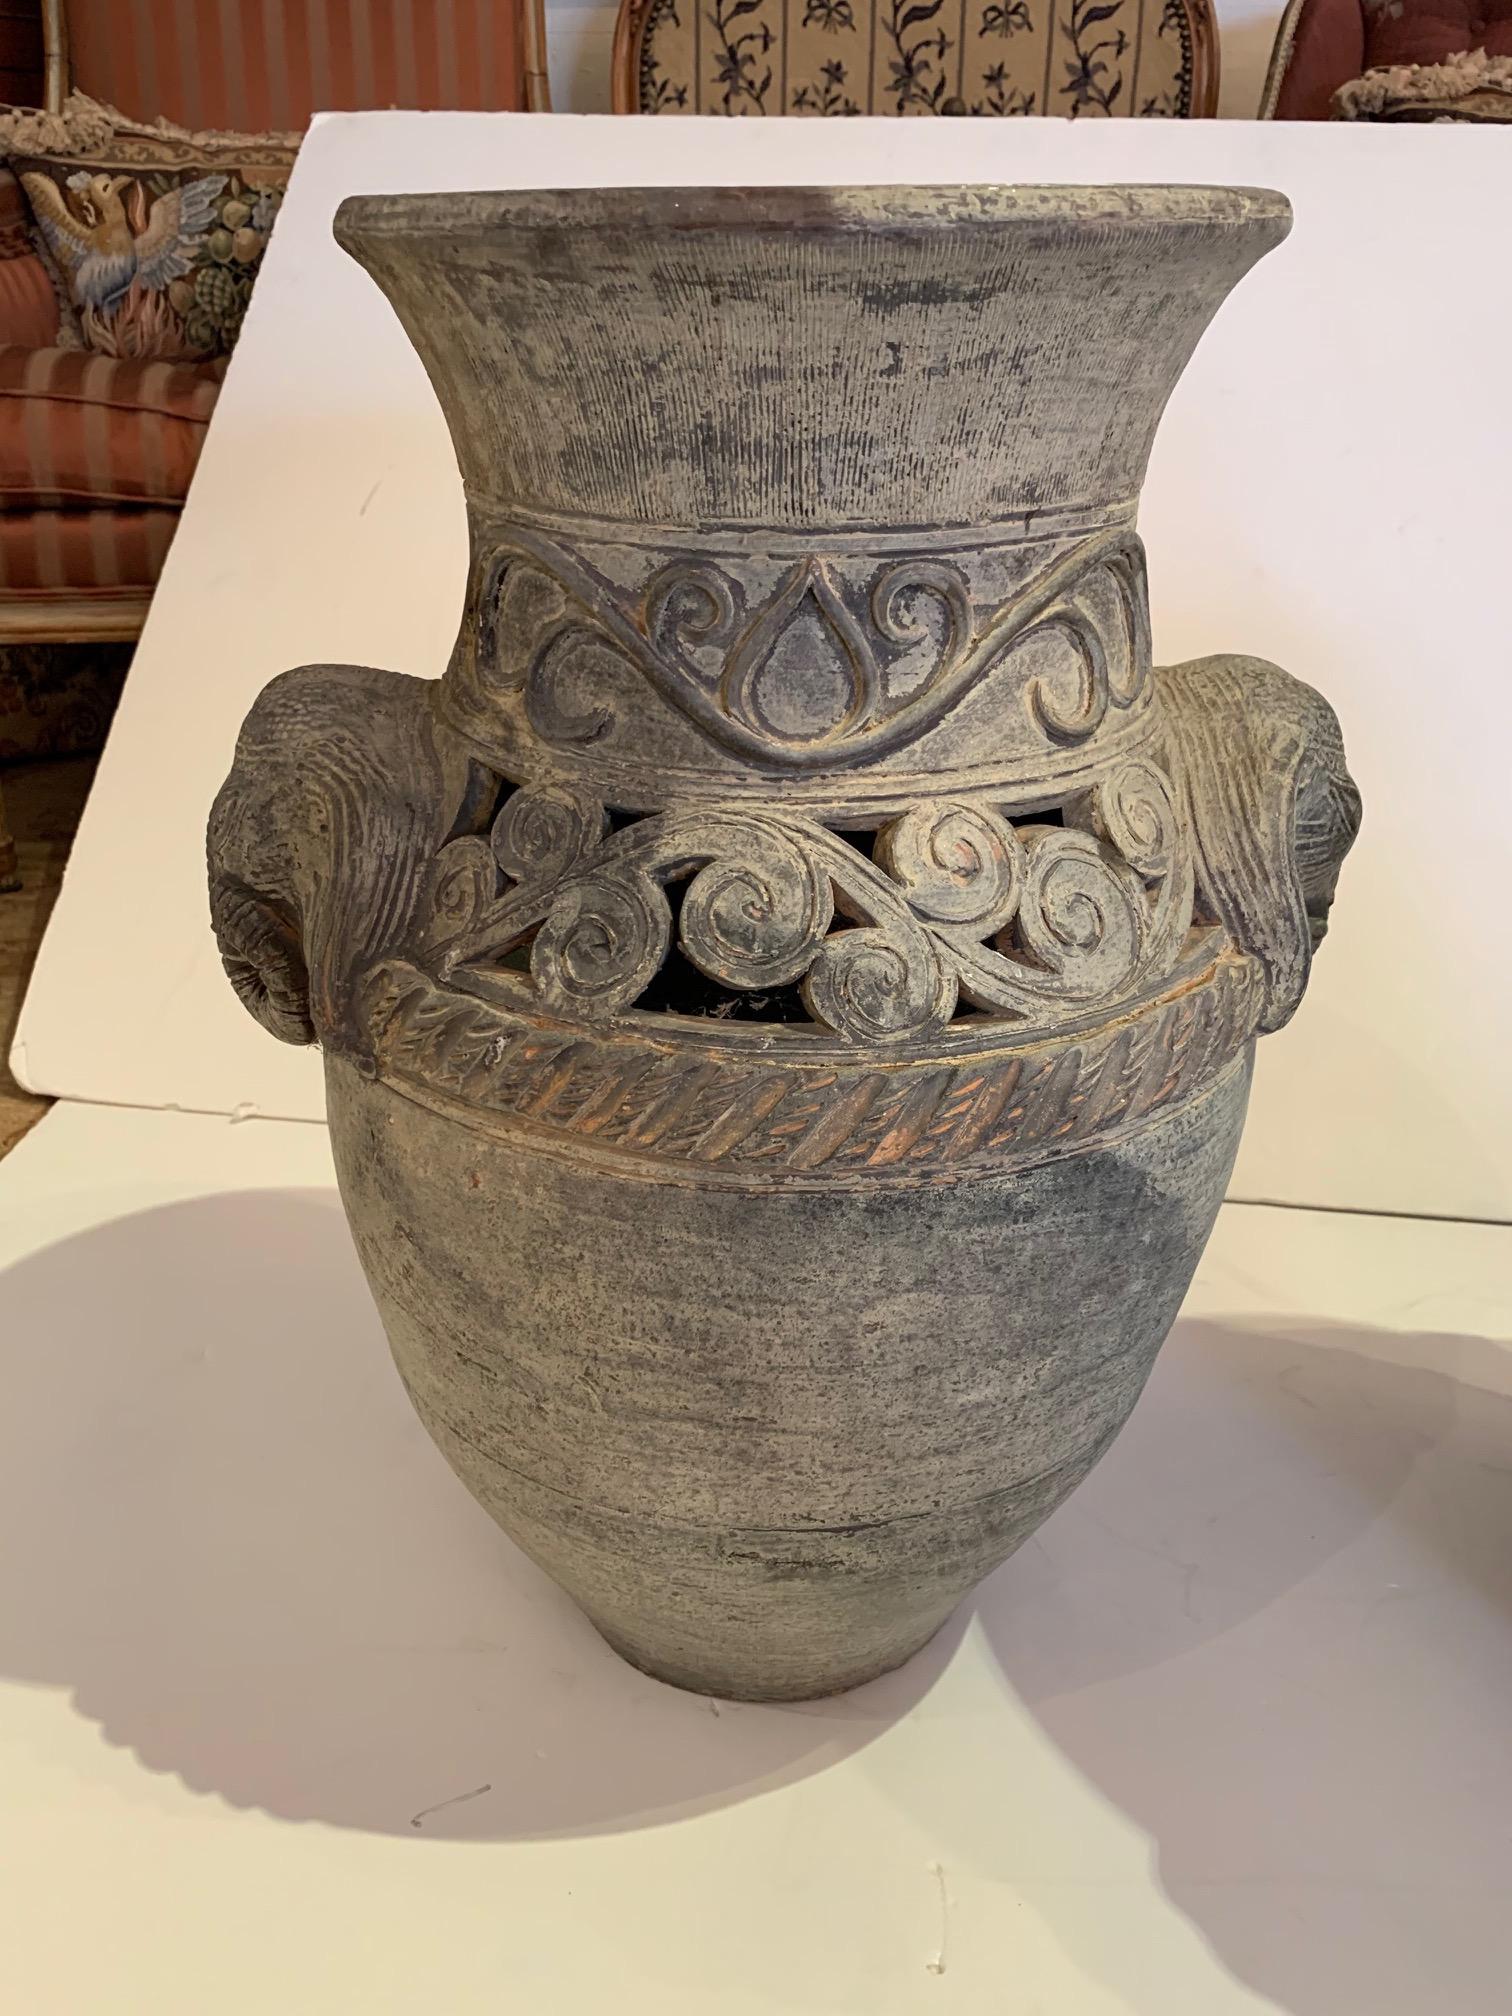 Pair of large terracotta vessels having a greyish green patina, decorated with marvelous elephant heads on the sides. One urn is slightly taller by one inch (24